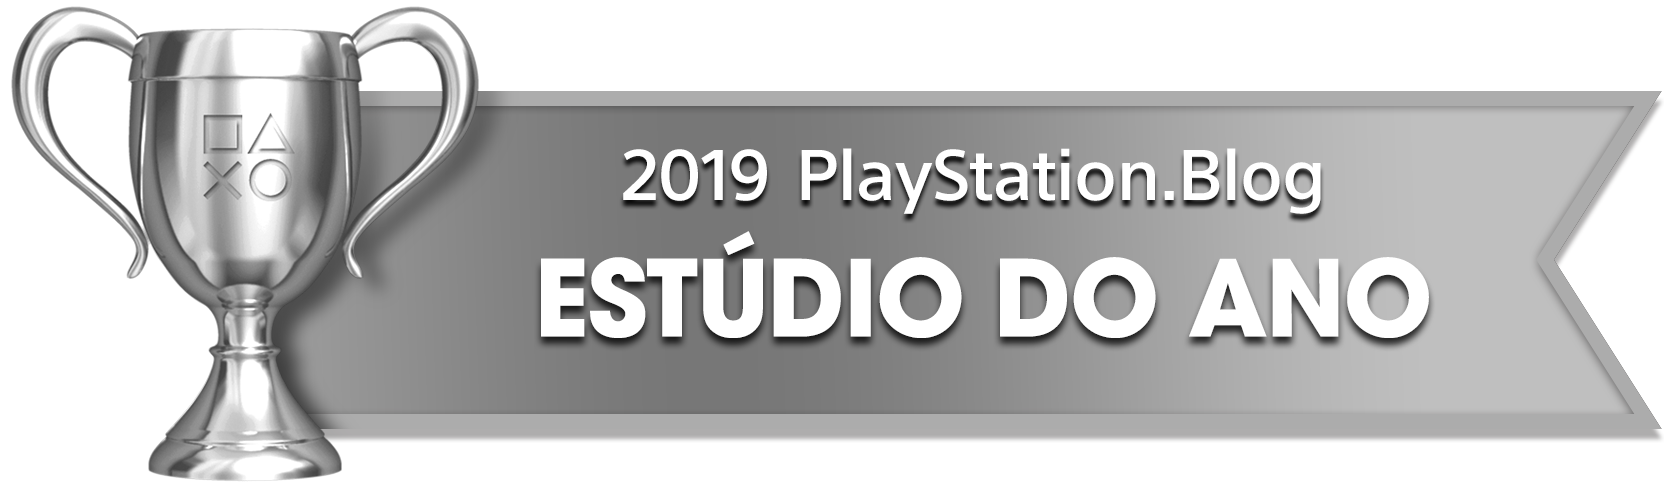 PS Blog Game of the Year 2019 - Studio of the Year - 3 - Silver